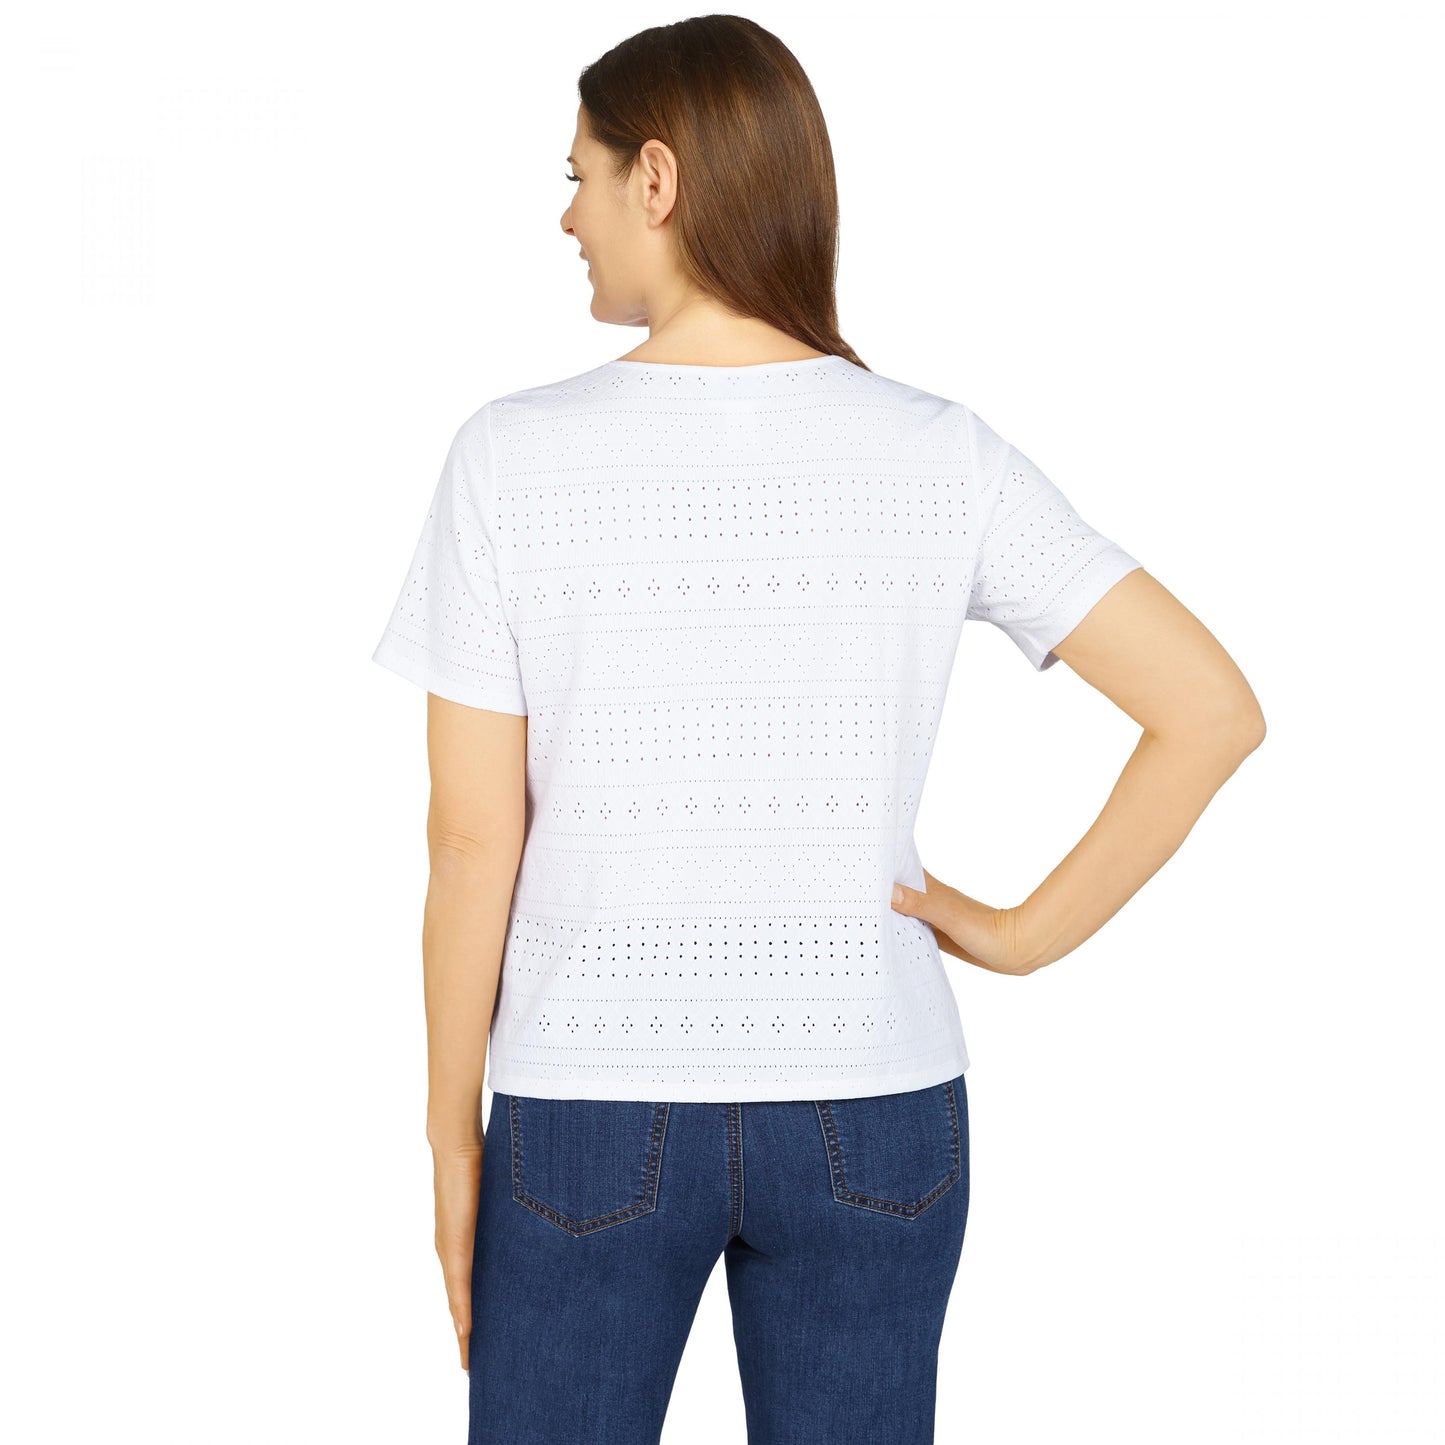 Ann Arbor Missy Eyelet Tie-Front Shirt With Necklace